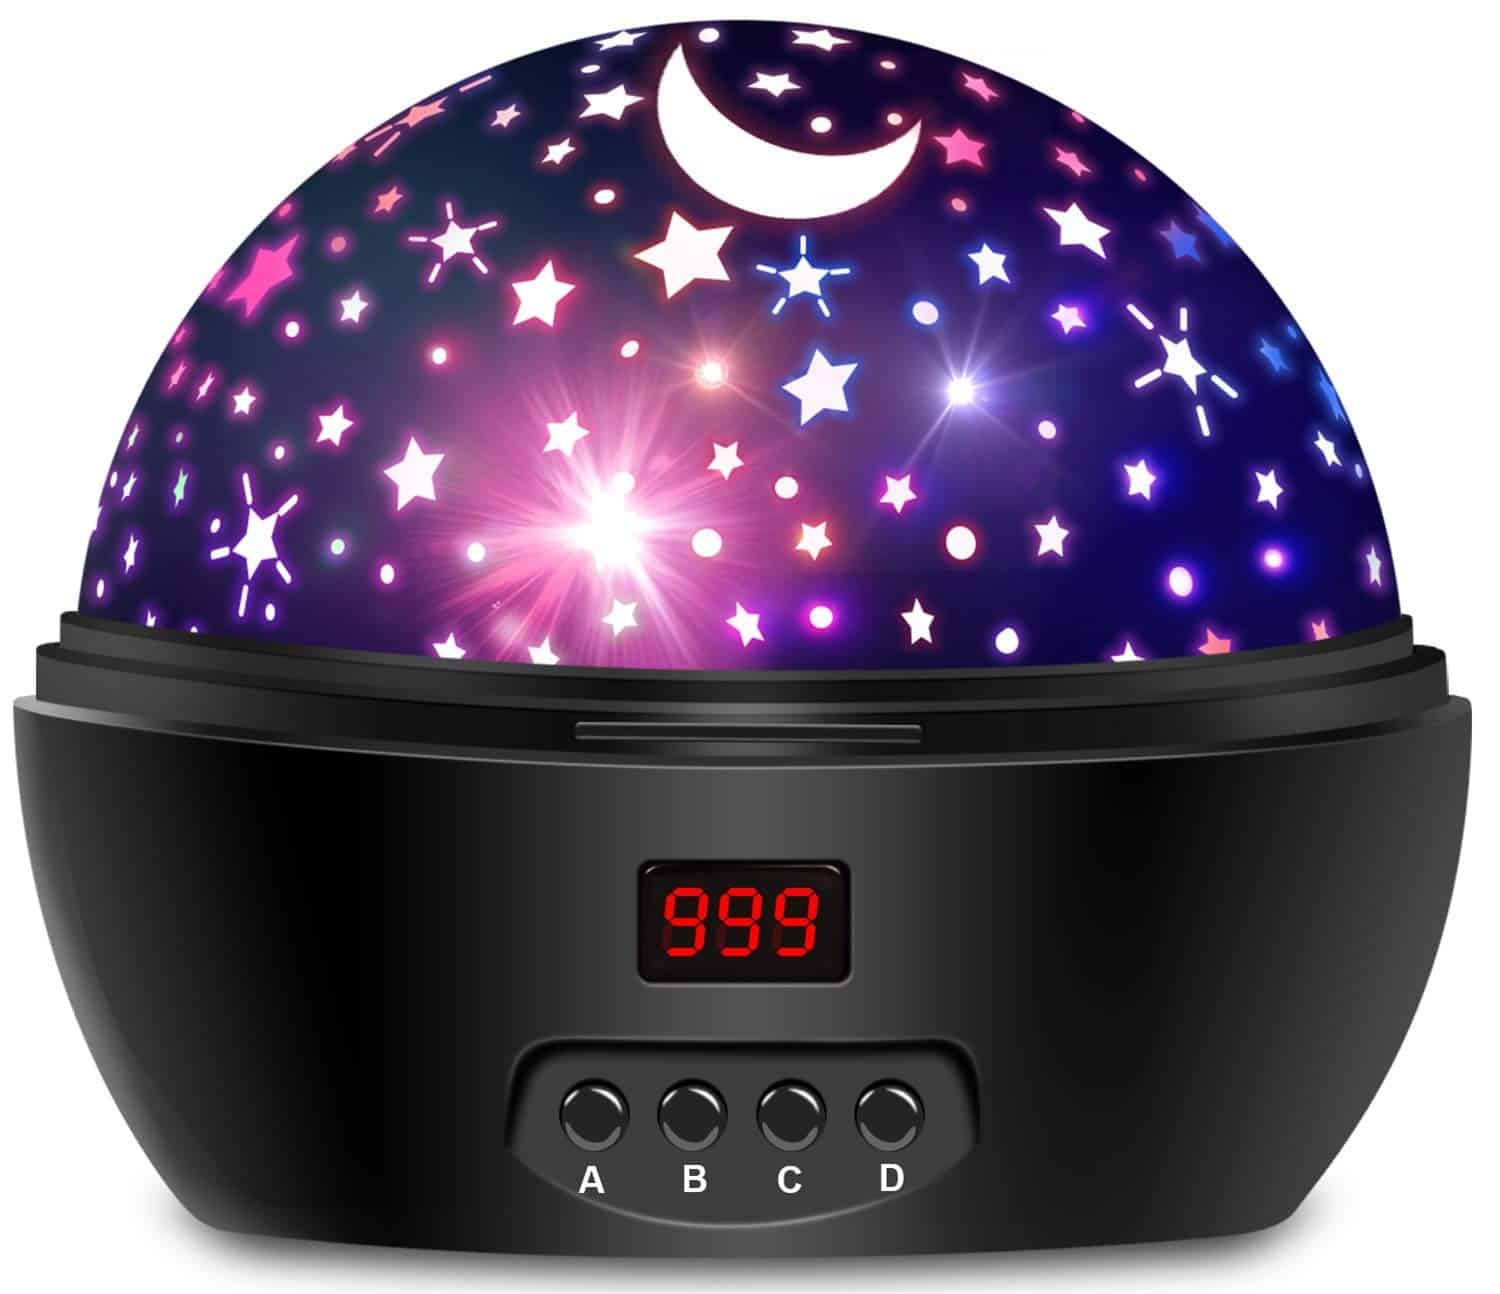 Best Star Projectors For Kids 2021, Lamp That Projects Stars On Ceiling